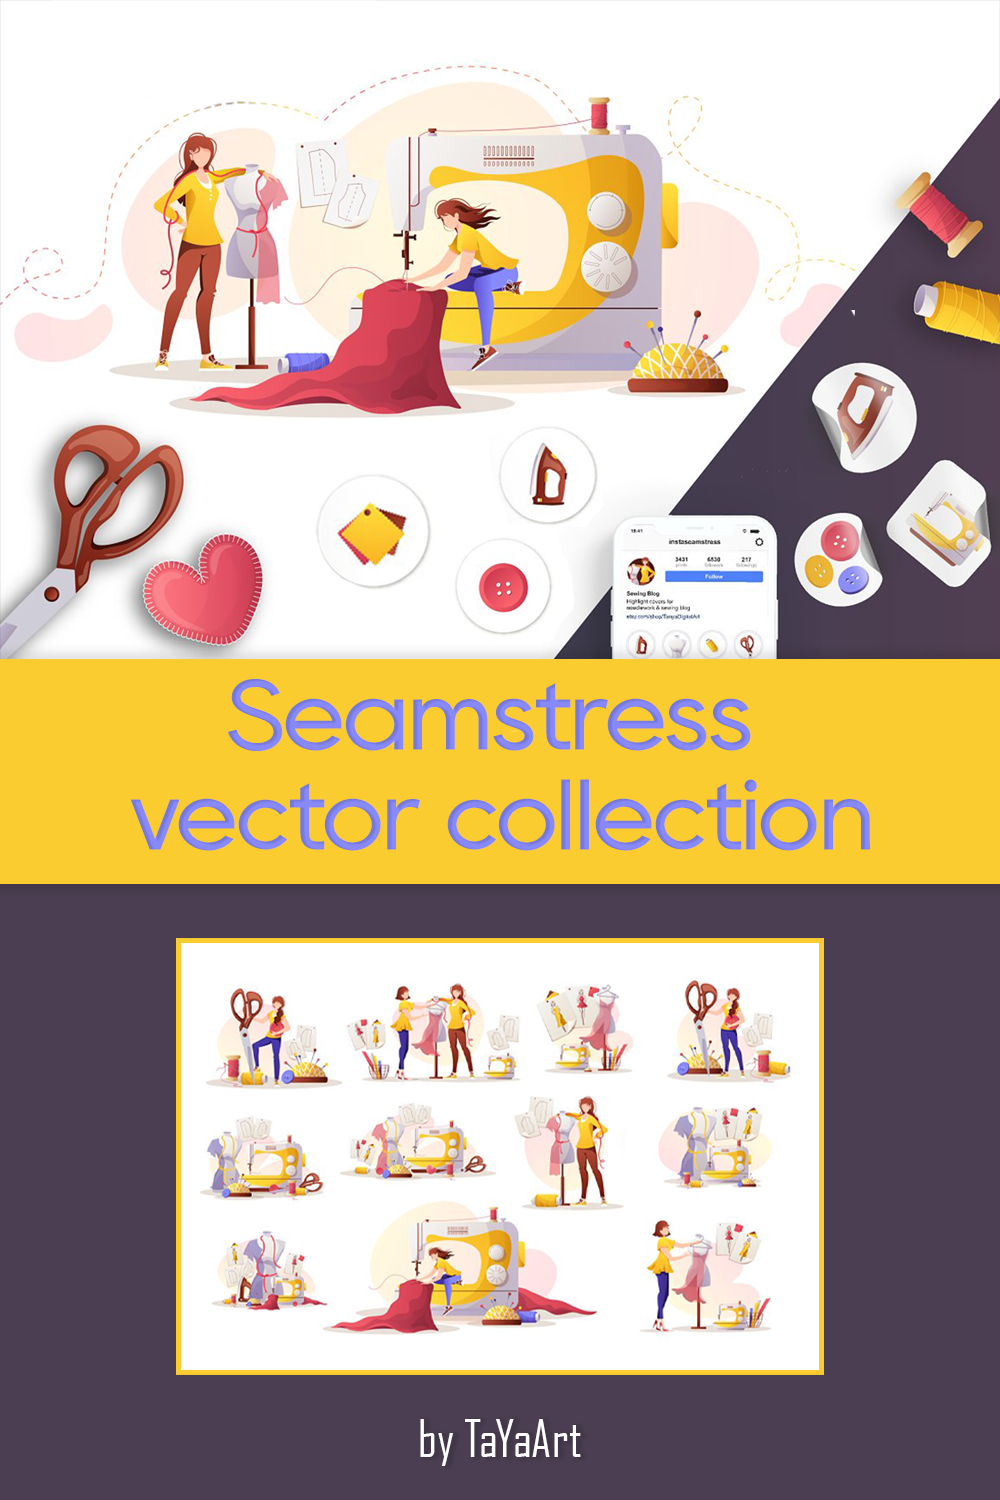 Seamstress vector collection of pinterest.